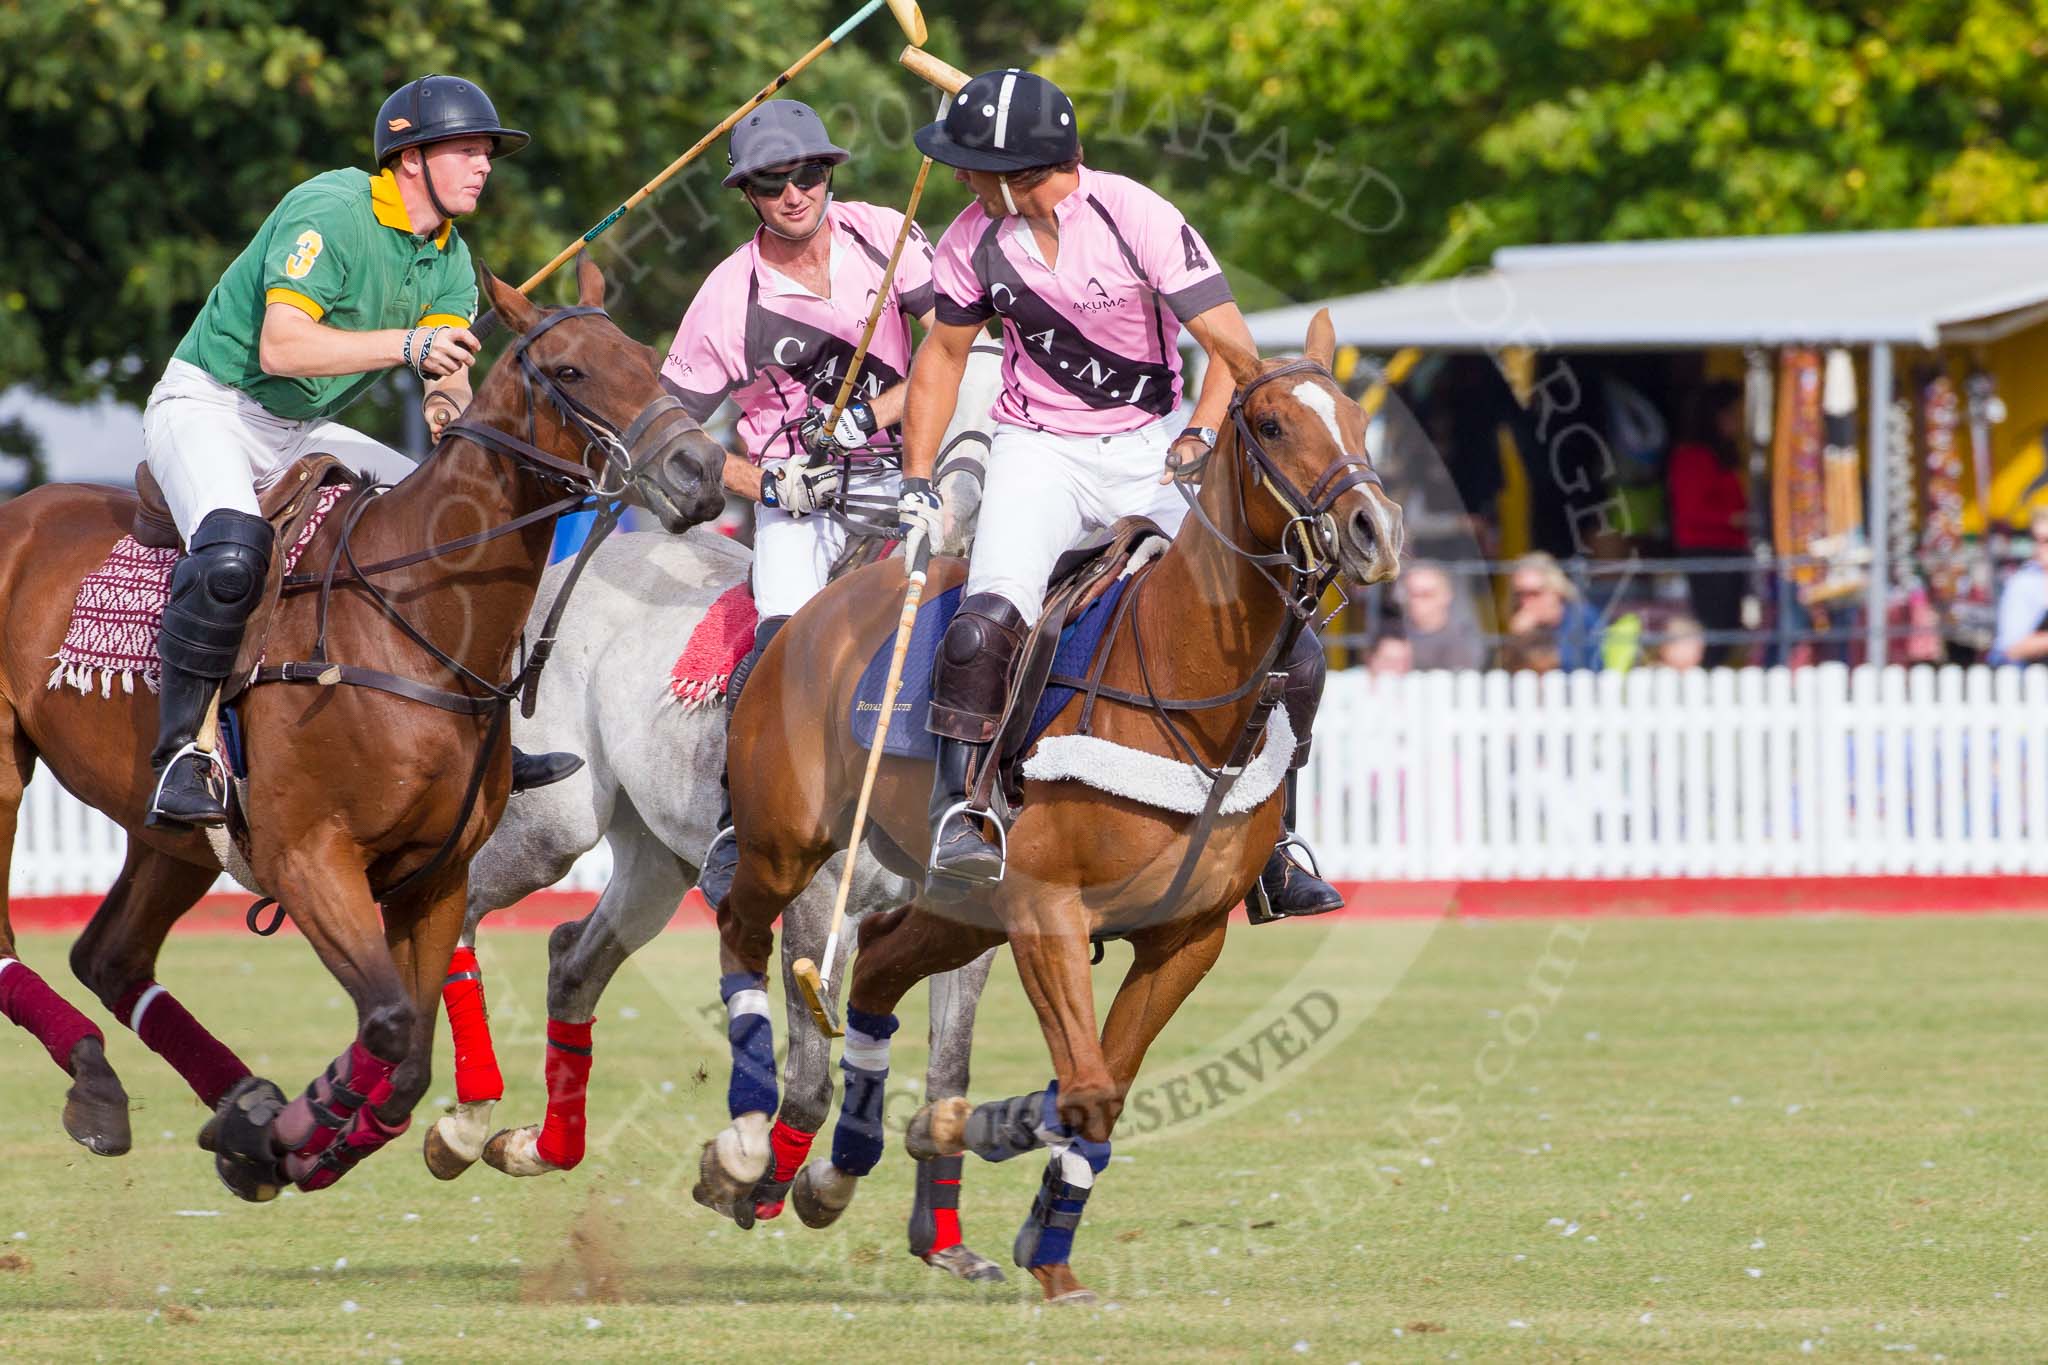 DBPC Polo in the Park 2013, Final of the Tusk Trophy (4 Goals), Rutland vs C.A.N.I..
Dallas Burston Polo Club, ,
Southam,
Warwickshire,
United Kingdom,
on 01 September 2013 at 16:37, image #591